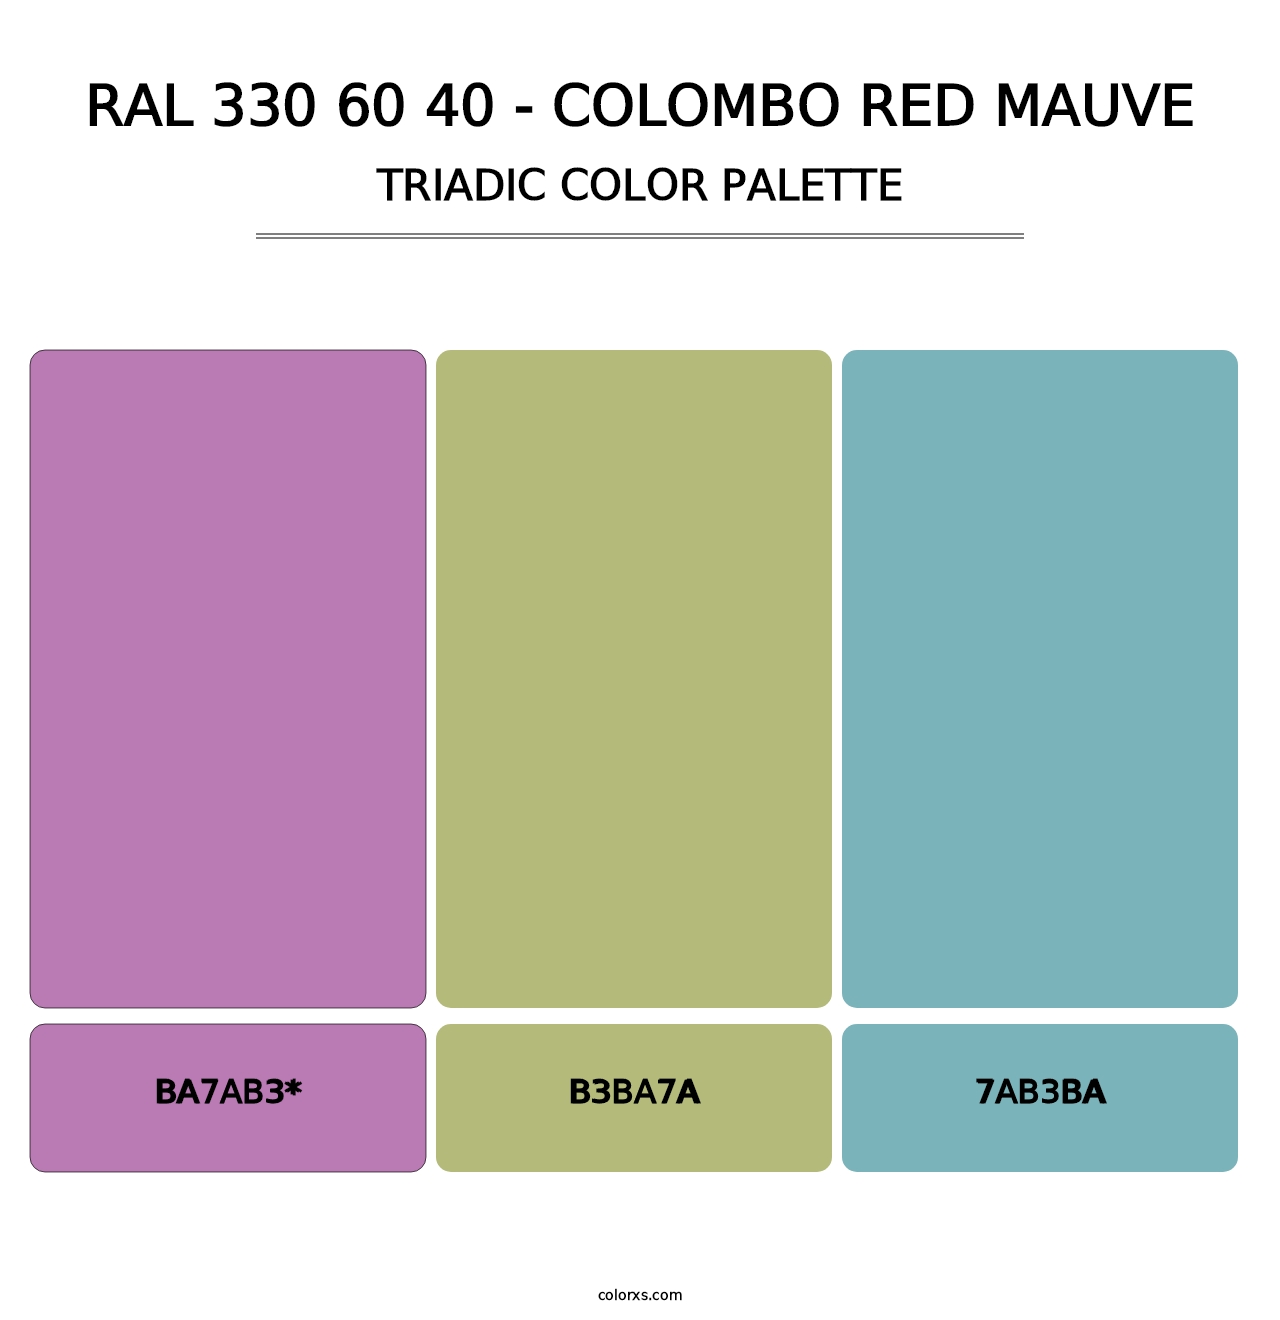 RAL 330 60 40 - Colombo Red Mauve - Triadic Color Palette